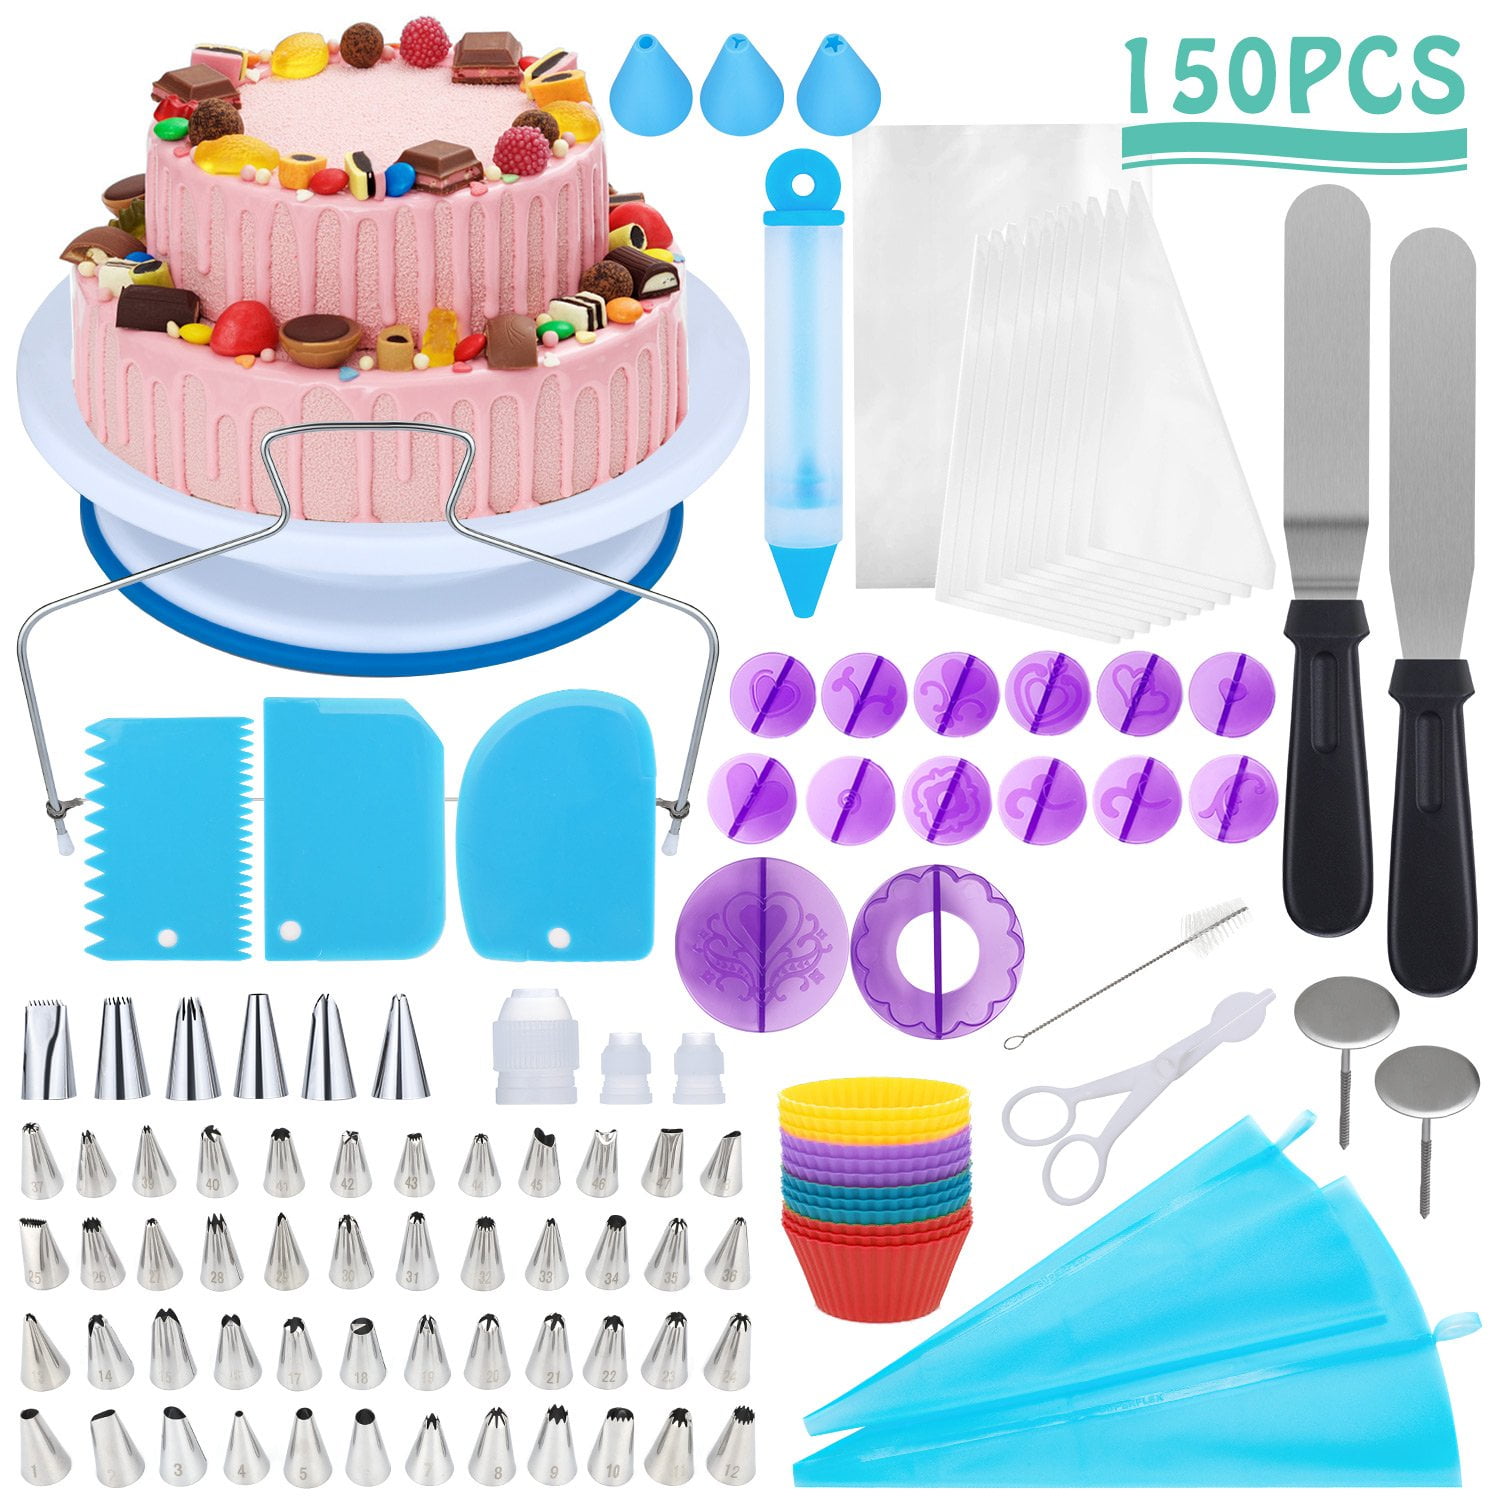 Cake Piping Nozzles Kit Set Icing Nozzle Coupler Flowers For Cookies Professional Cupcakes Flower Shape Floral Cookie Tips Decorating Nozzles